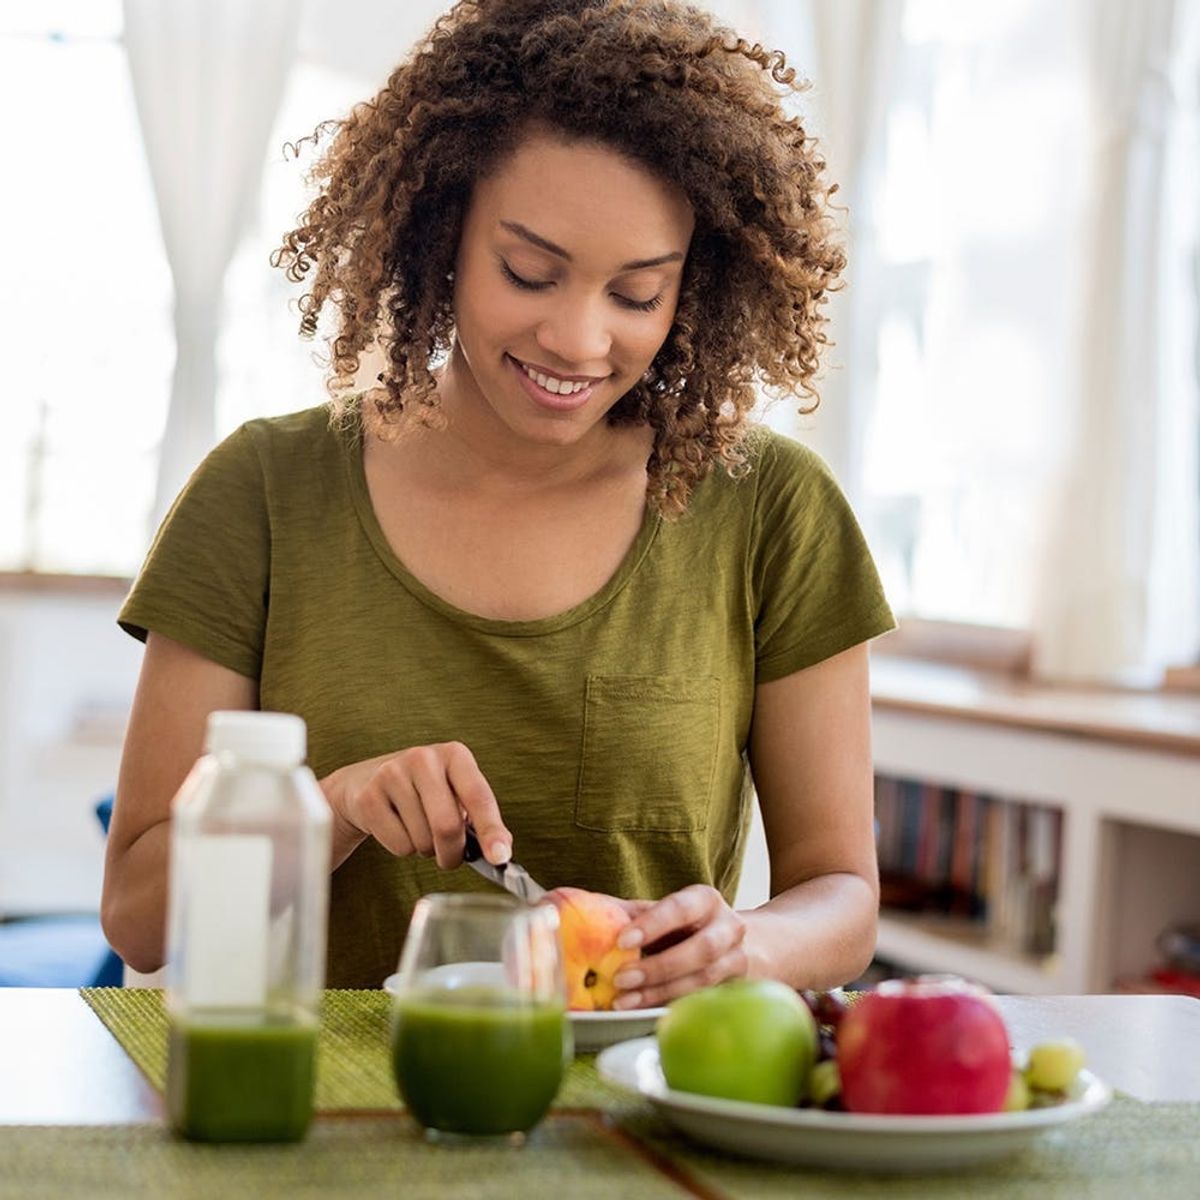 Eating This Healthy Ingredient Before a Meal Can Make You Feel Fuller